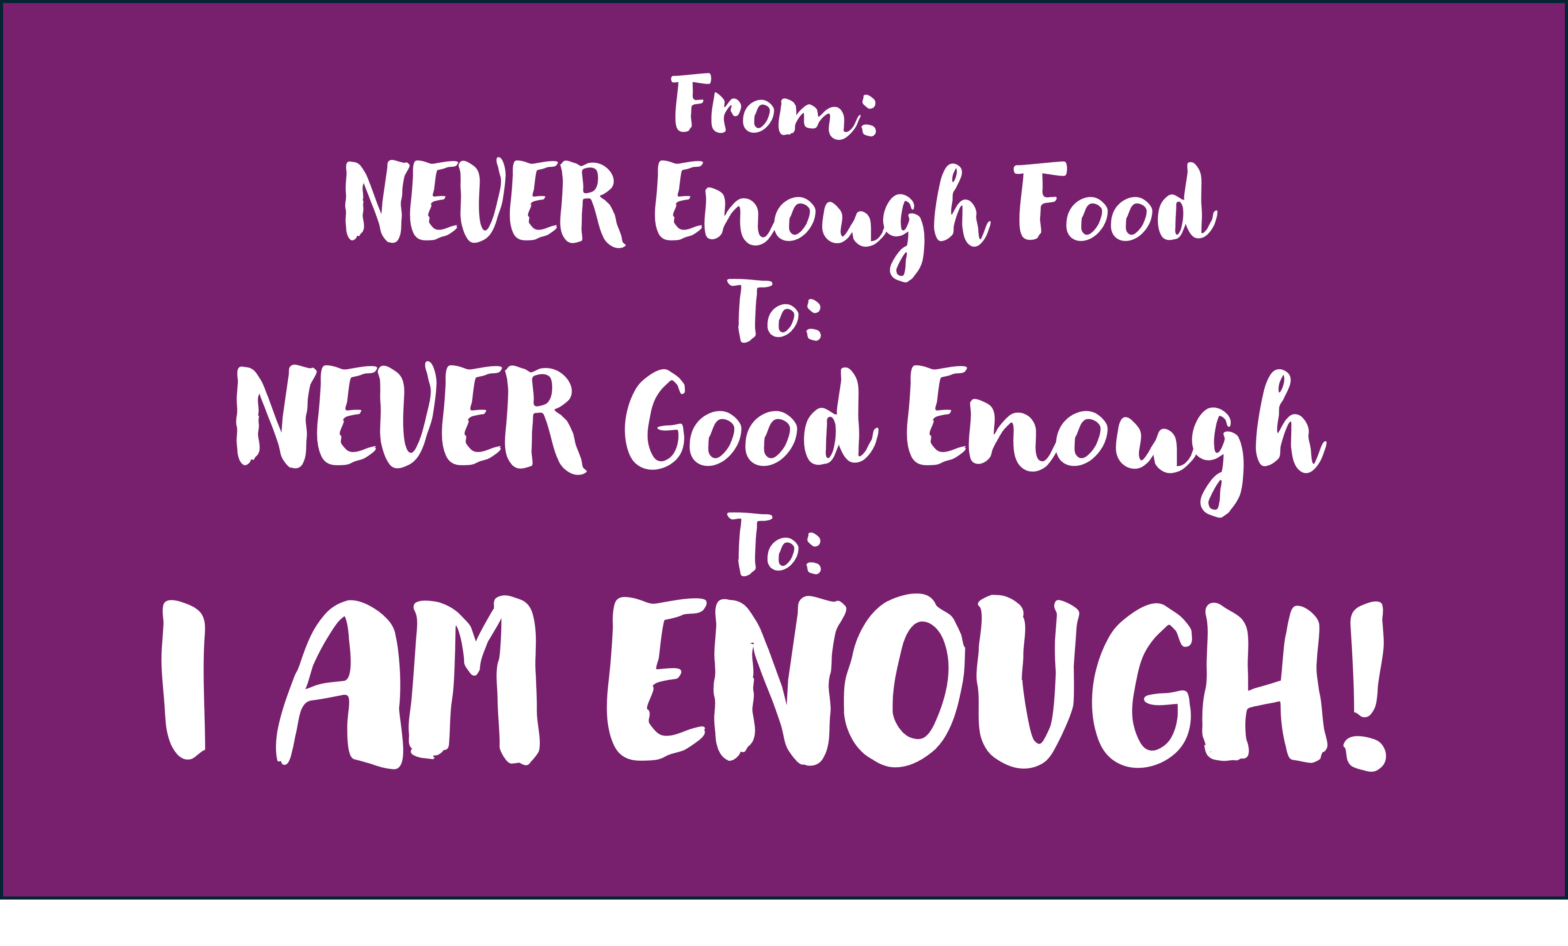 OA took me from Never good enough to I am enough!